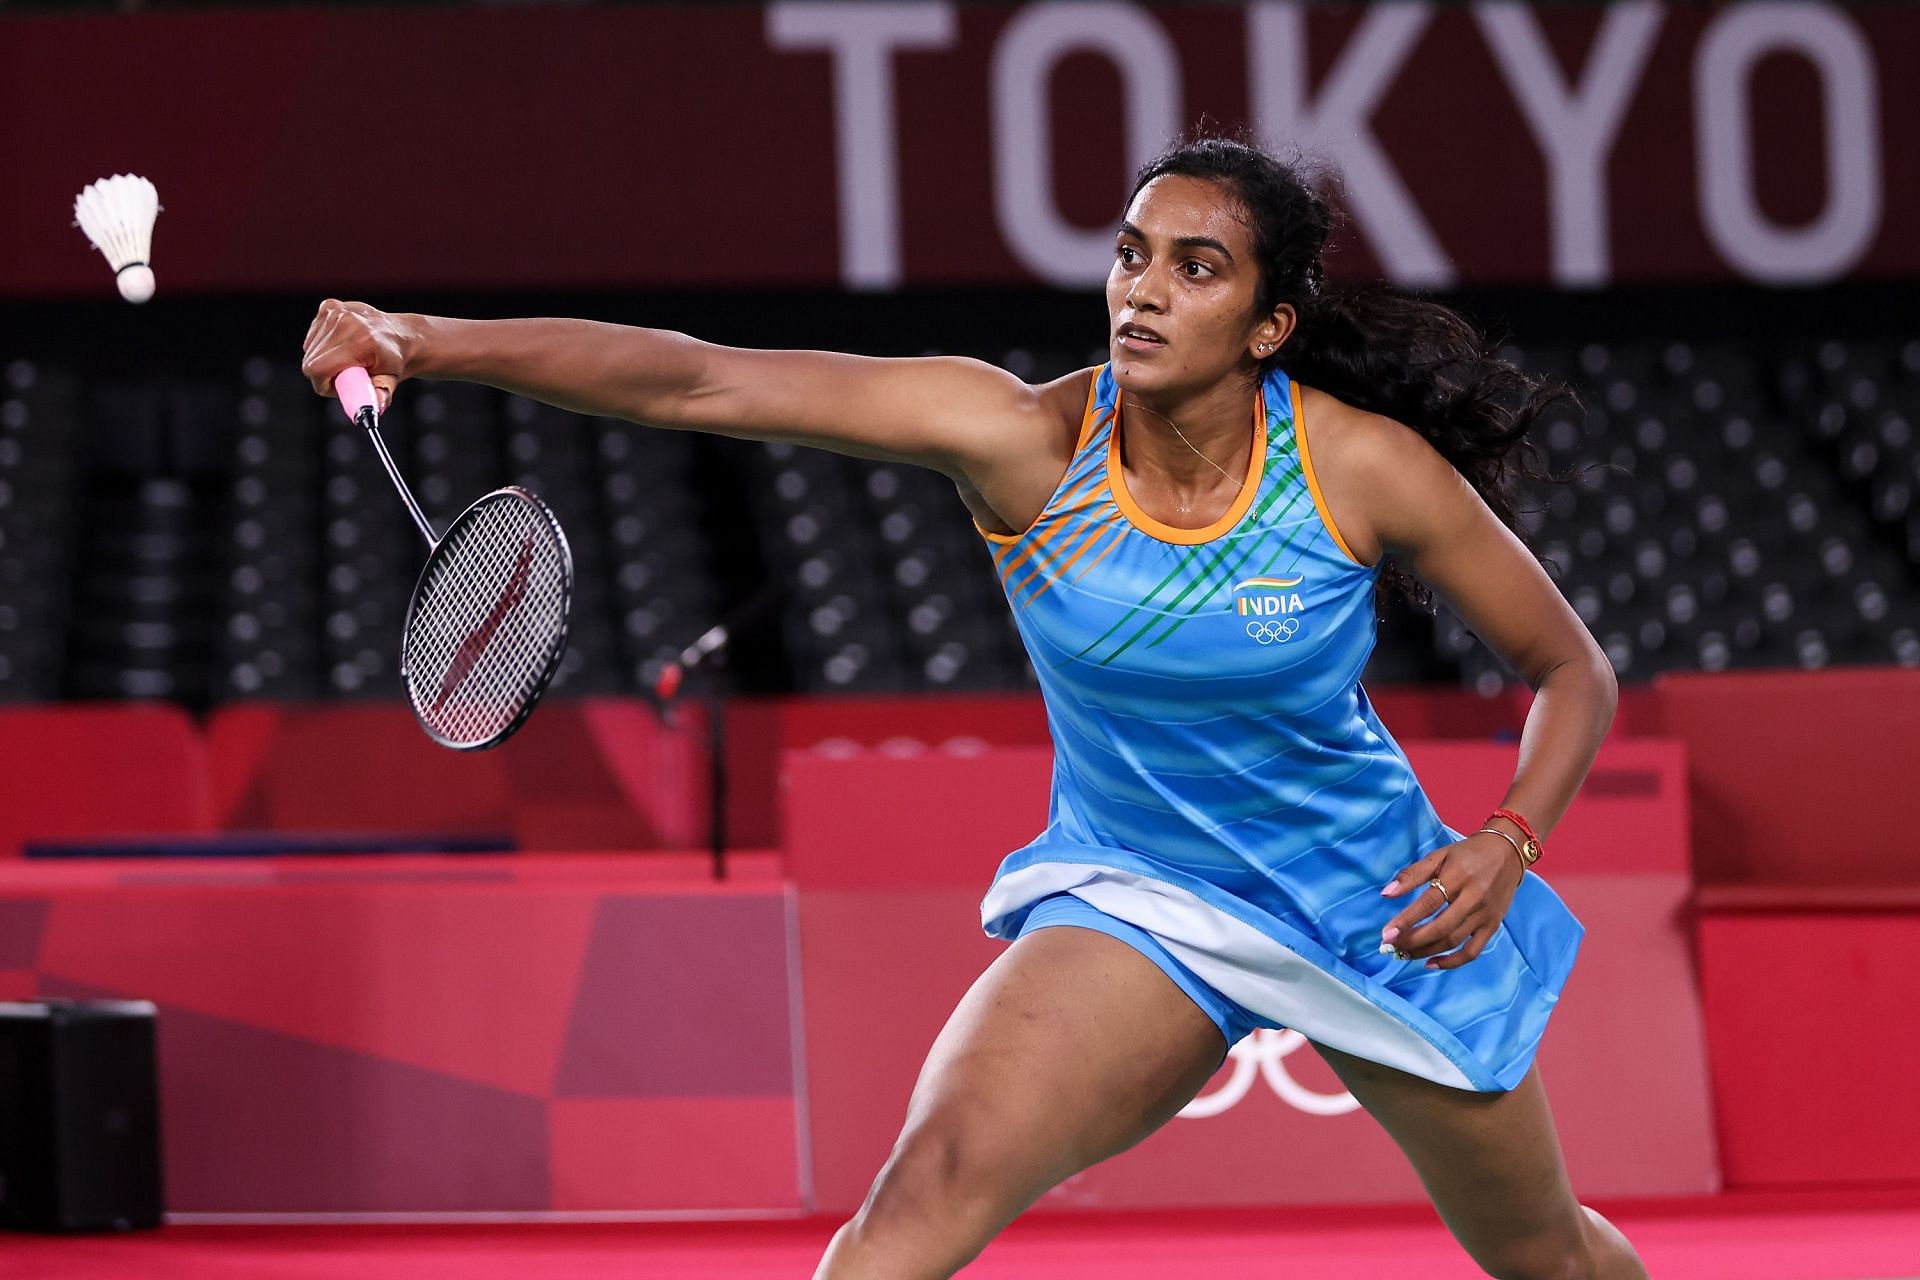 PV Sindhu in action at the 2020 Tokyo Olympics (Image courtesy: Getty Images)